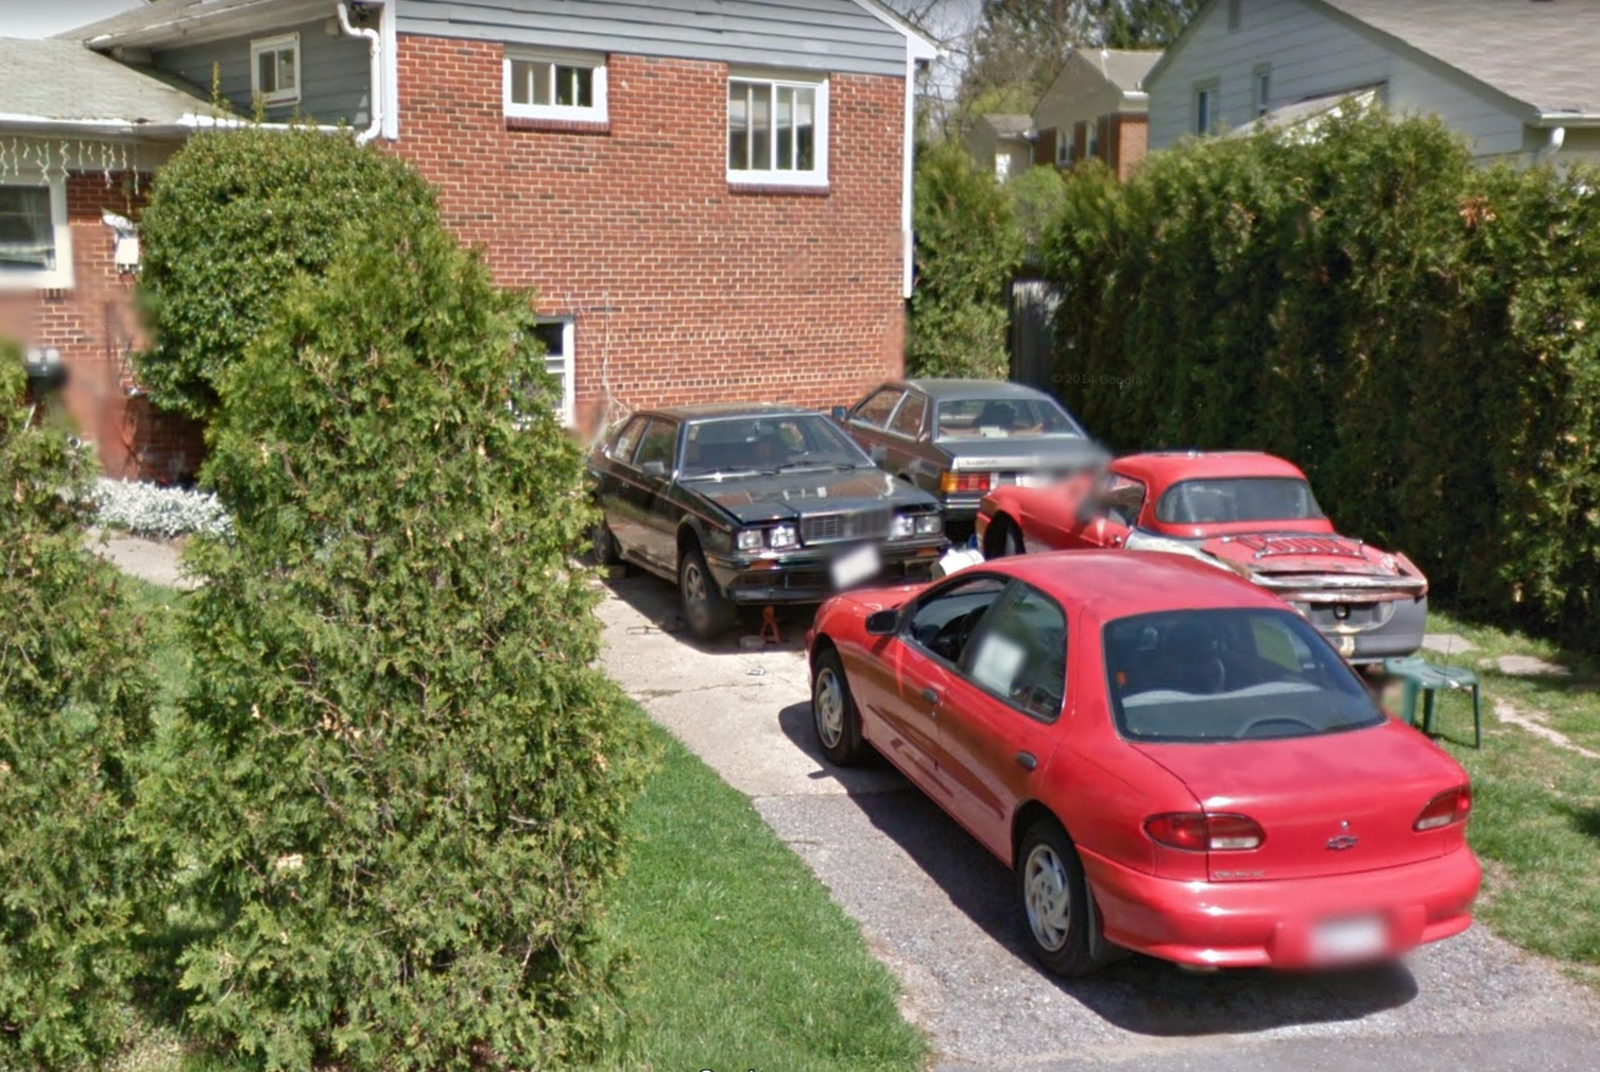 Illustration for article titled Spotted on Google Street View: multiple Maserati edition